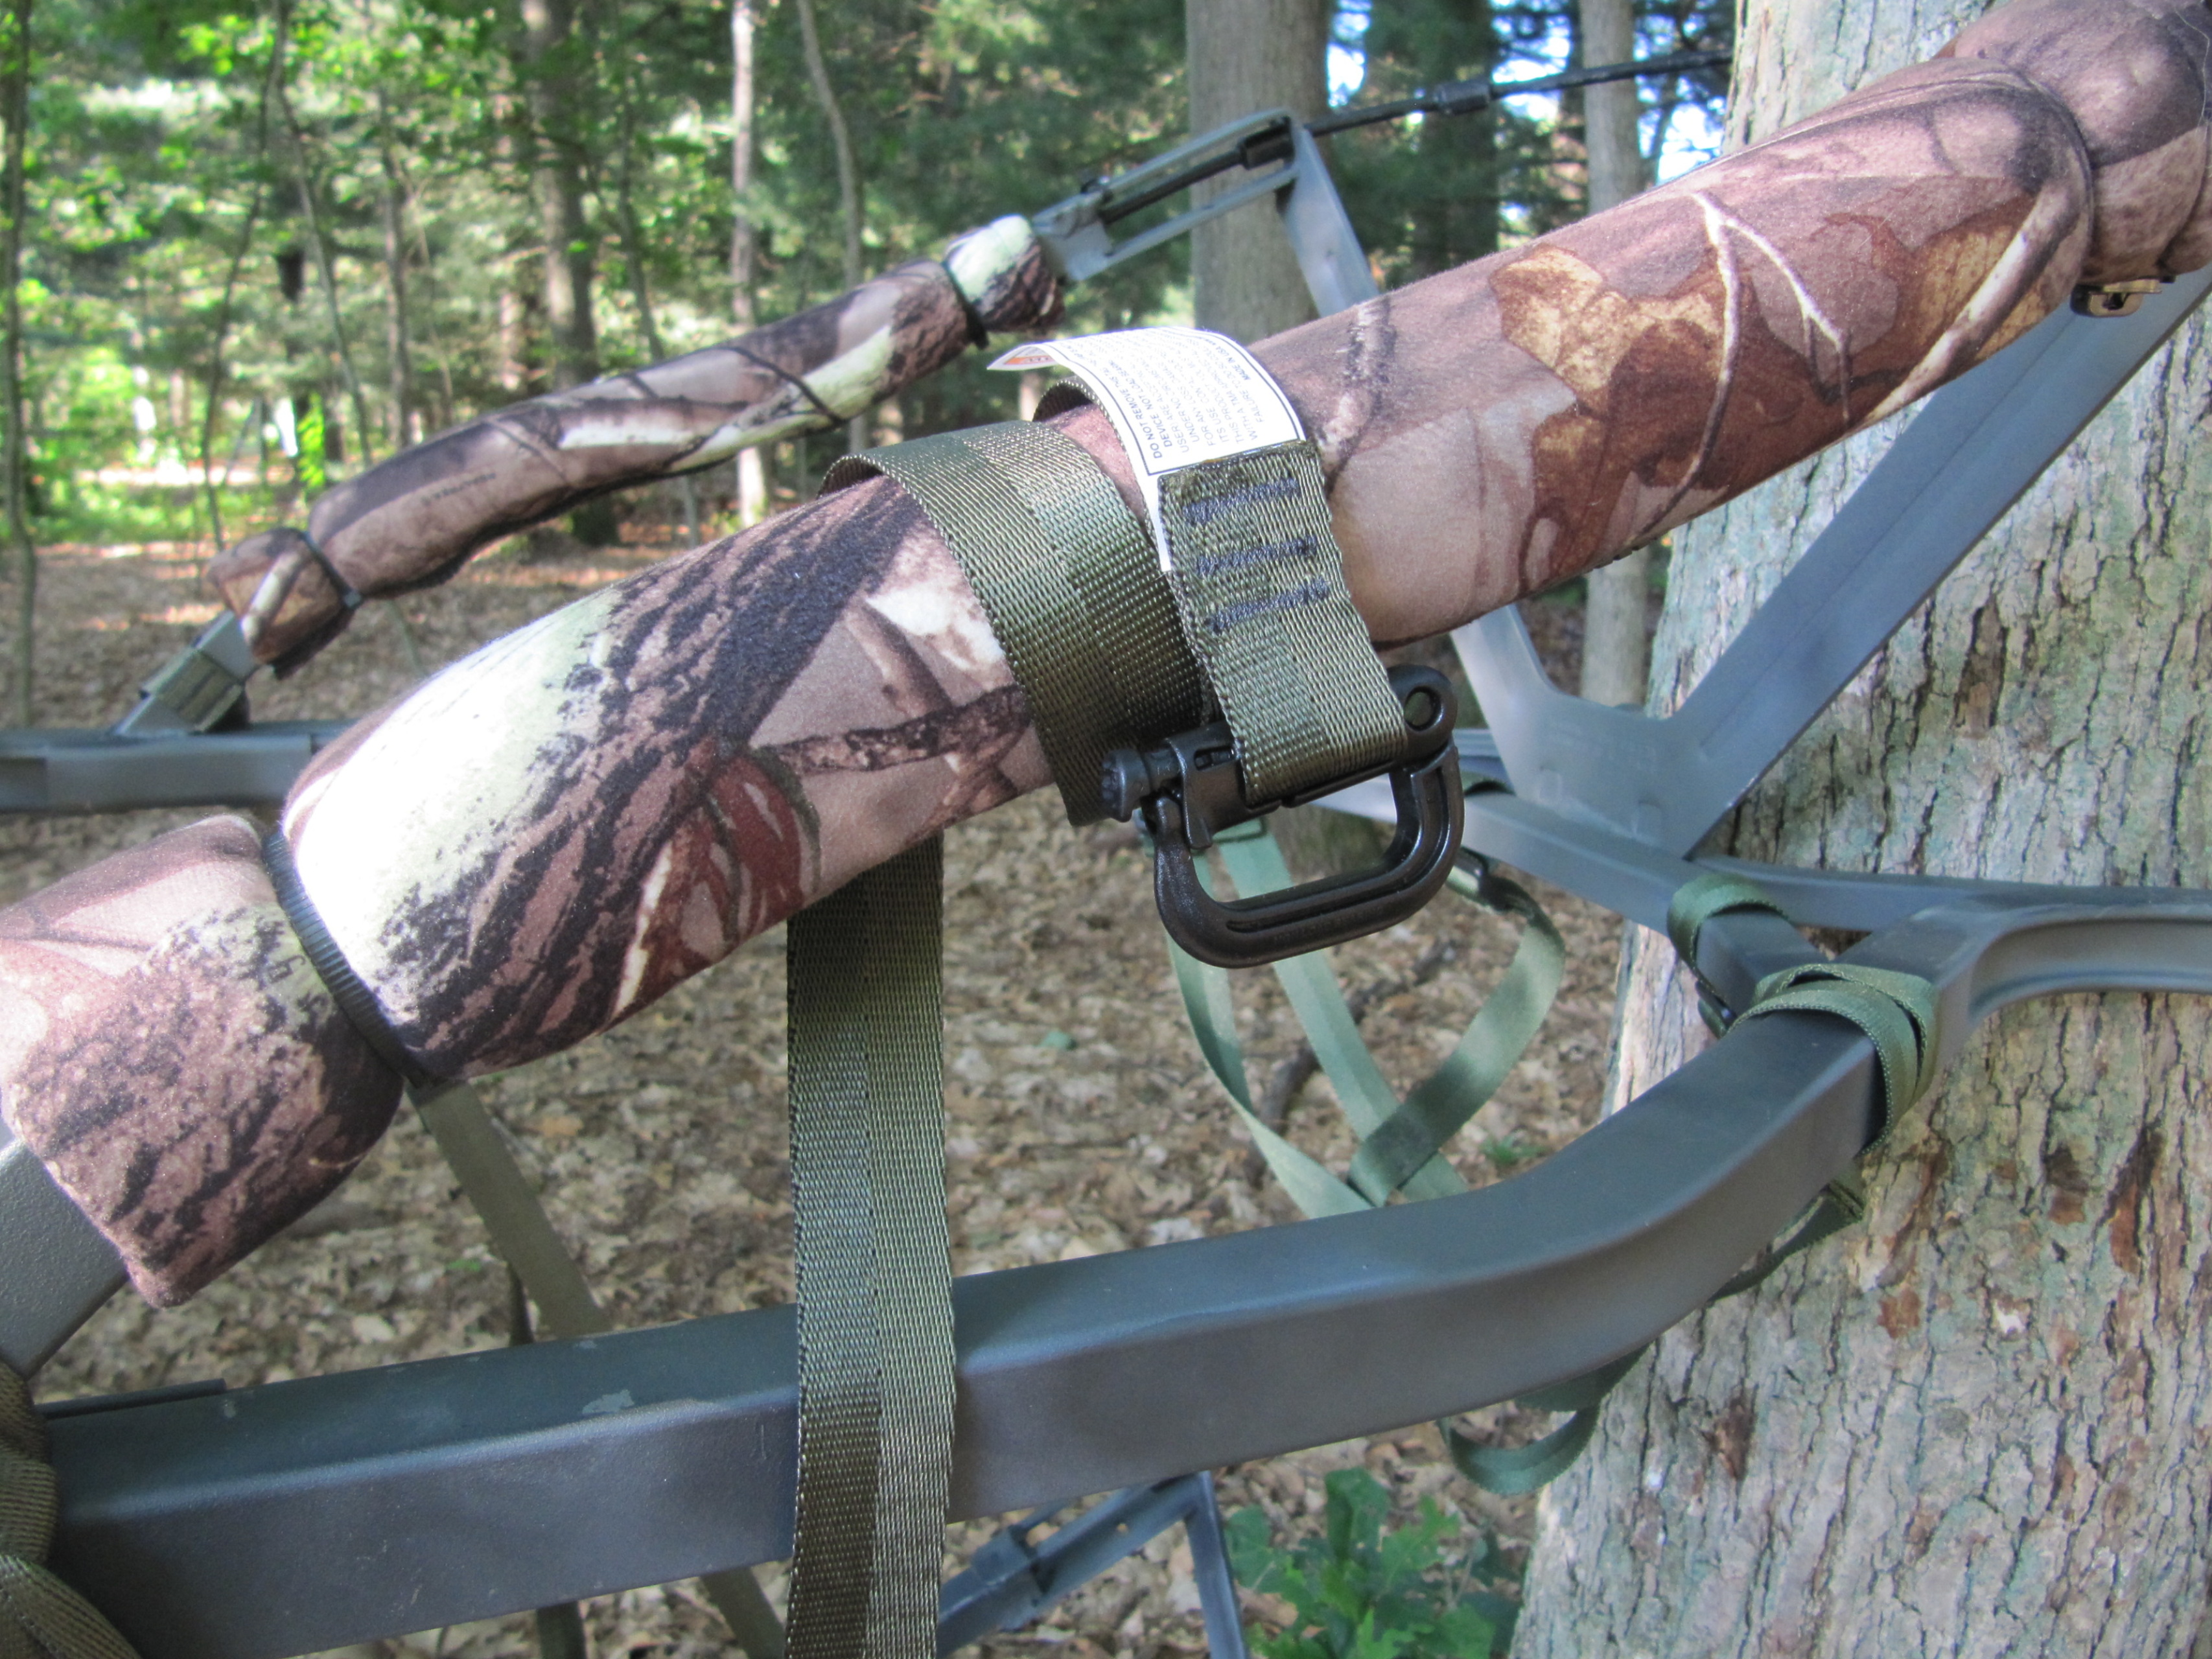 NEW THIRDHAND STABILIZER STRAPS FOR CLIMBING TREE STAND GREEN RETAIL $15 SALE $7 